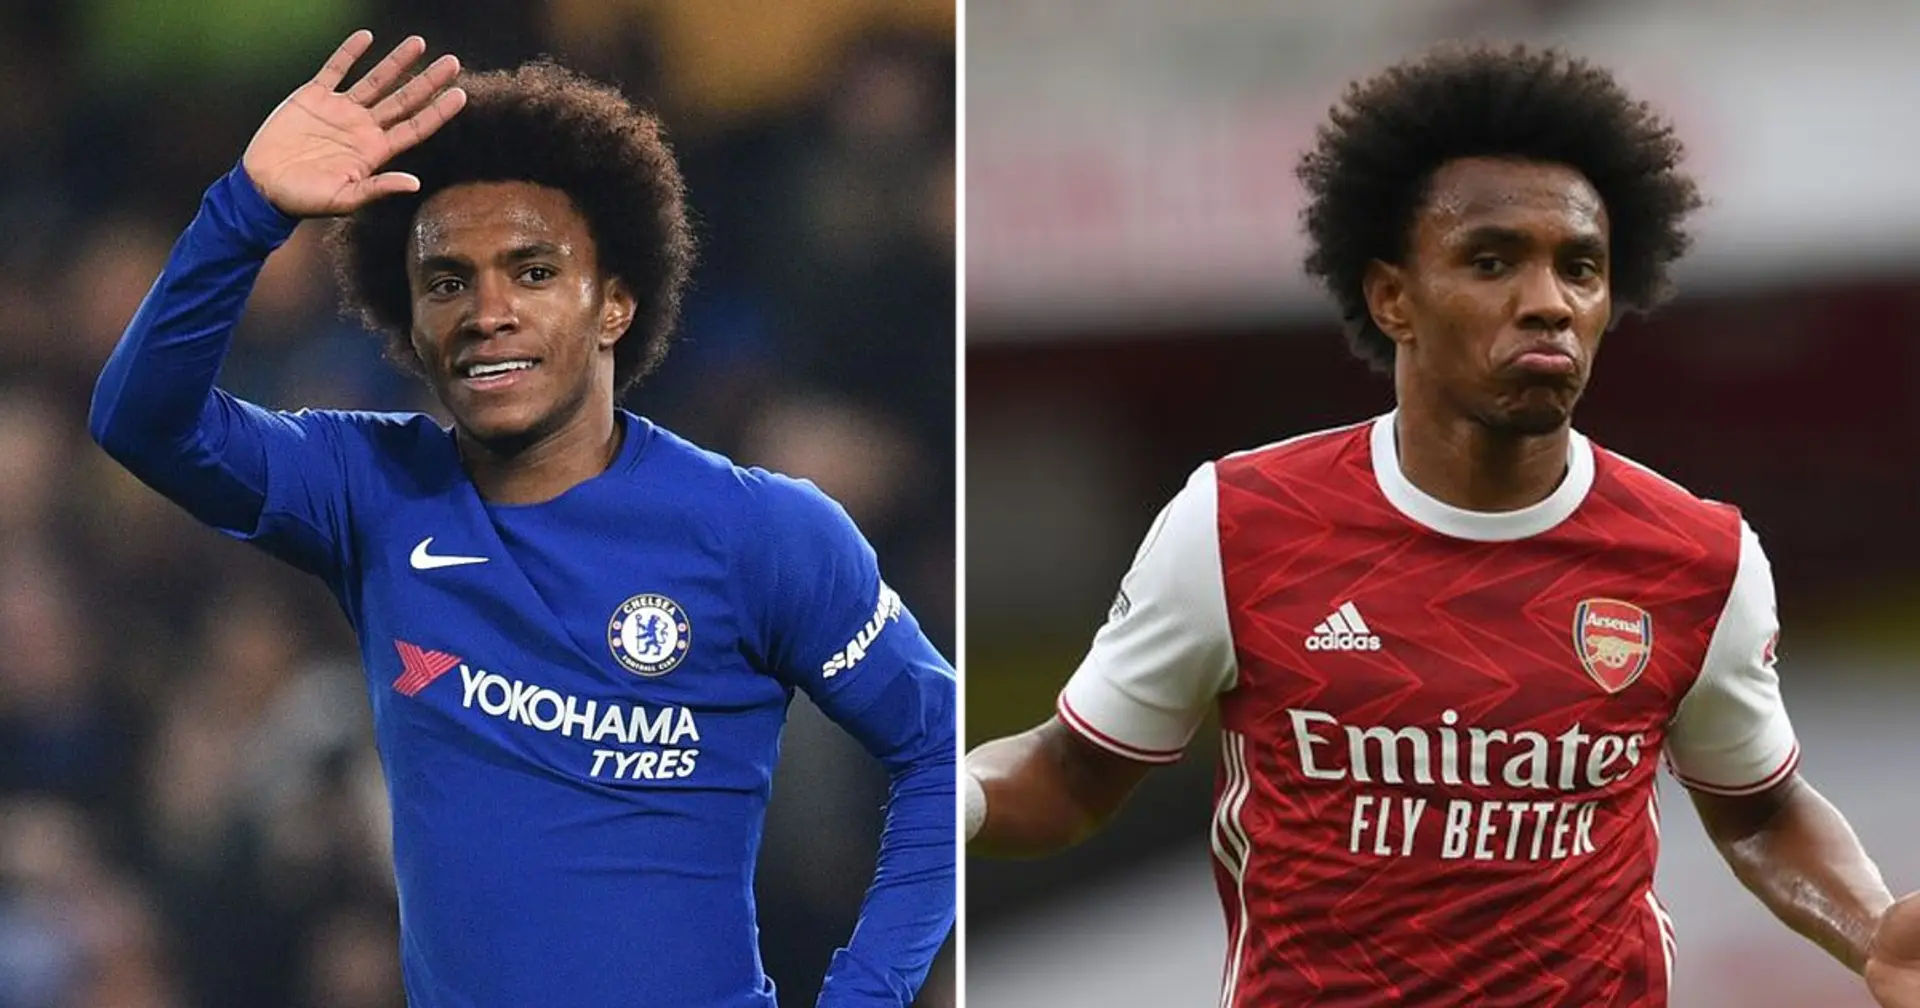 'I hear he's no fan of Tottenham', 'Arsenal fans ranting': CFC fans in stitches after Willian's reaction to Spurs win